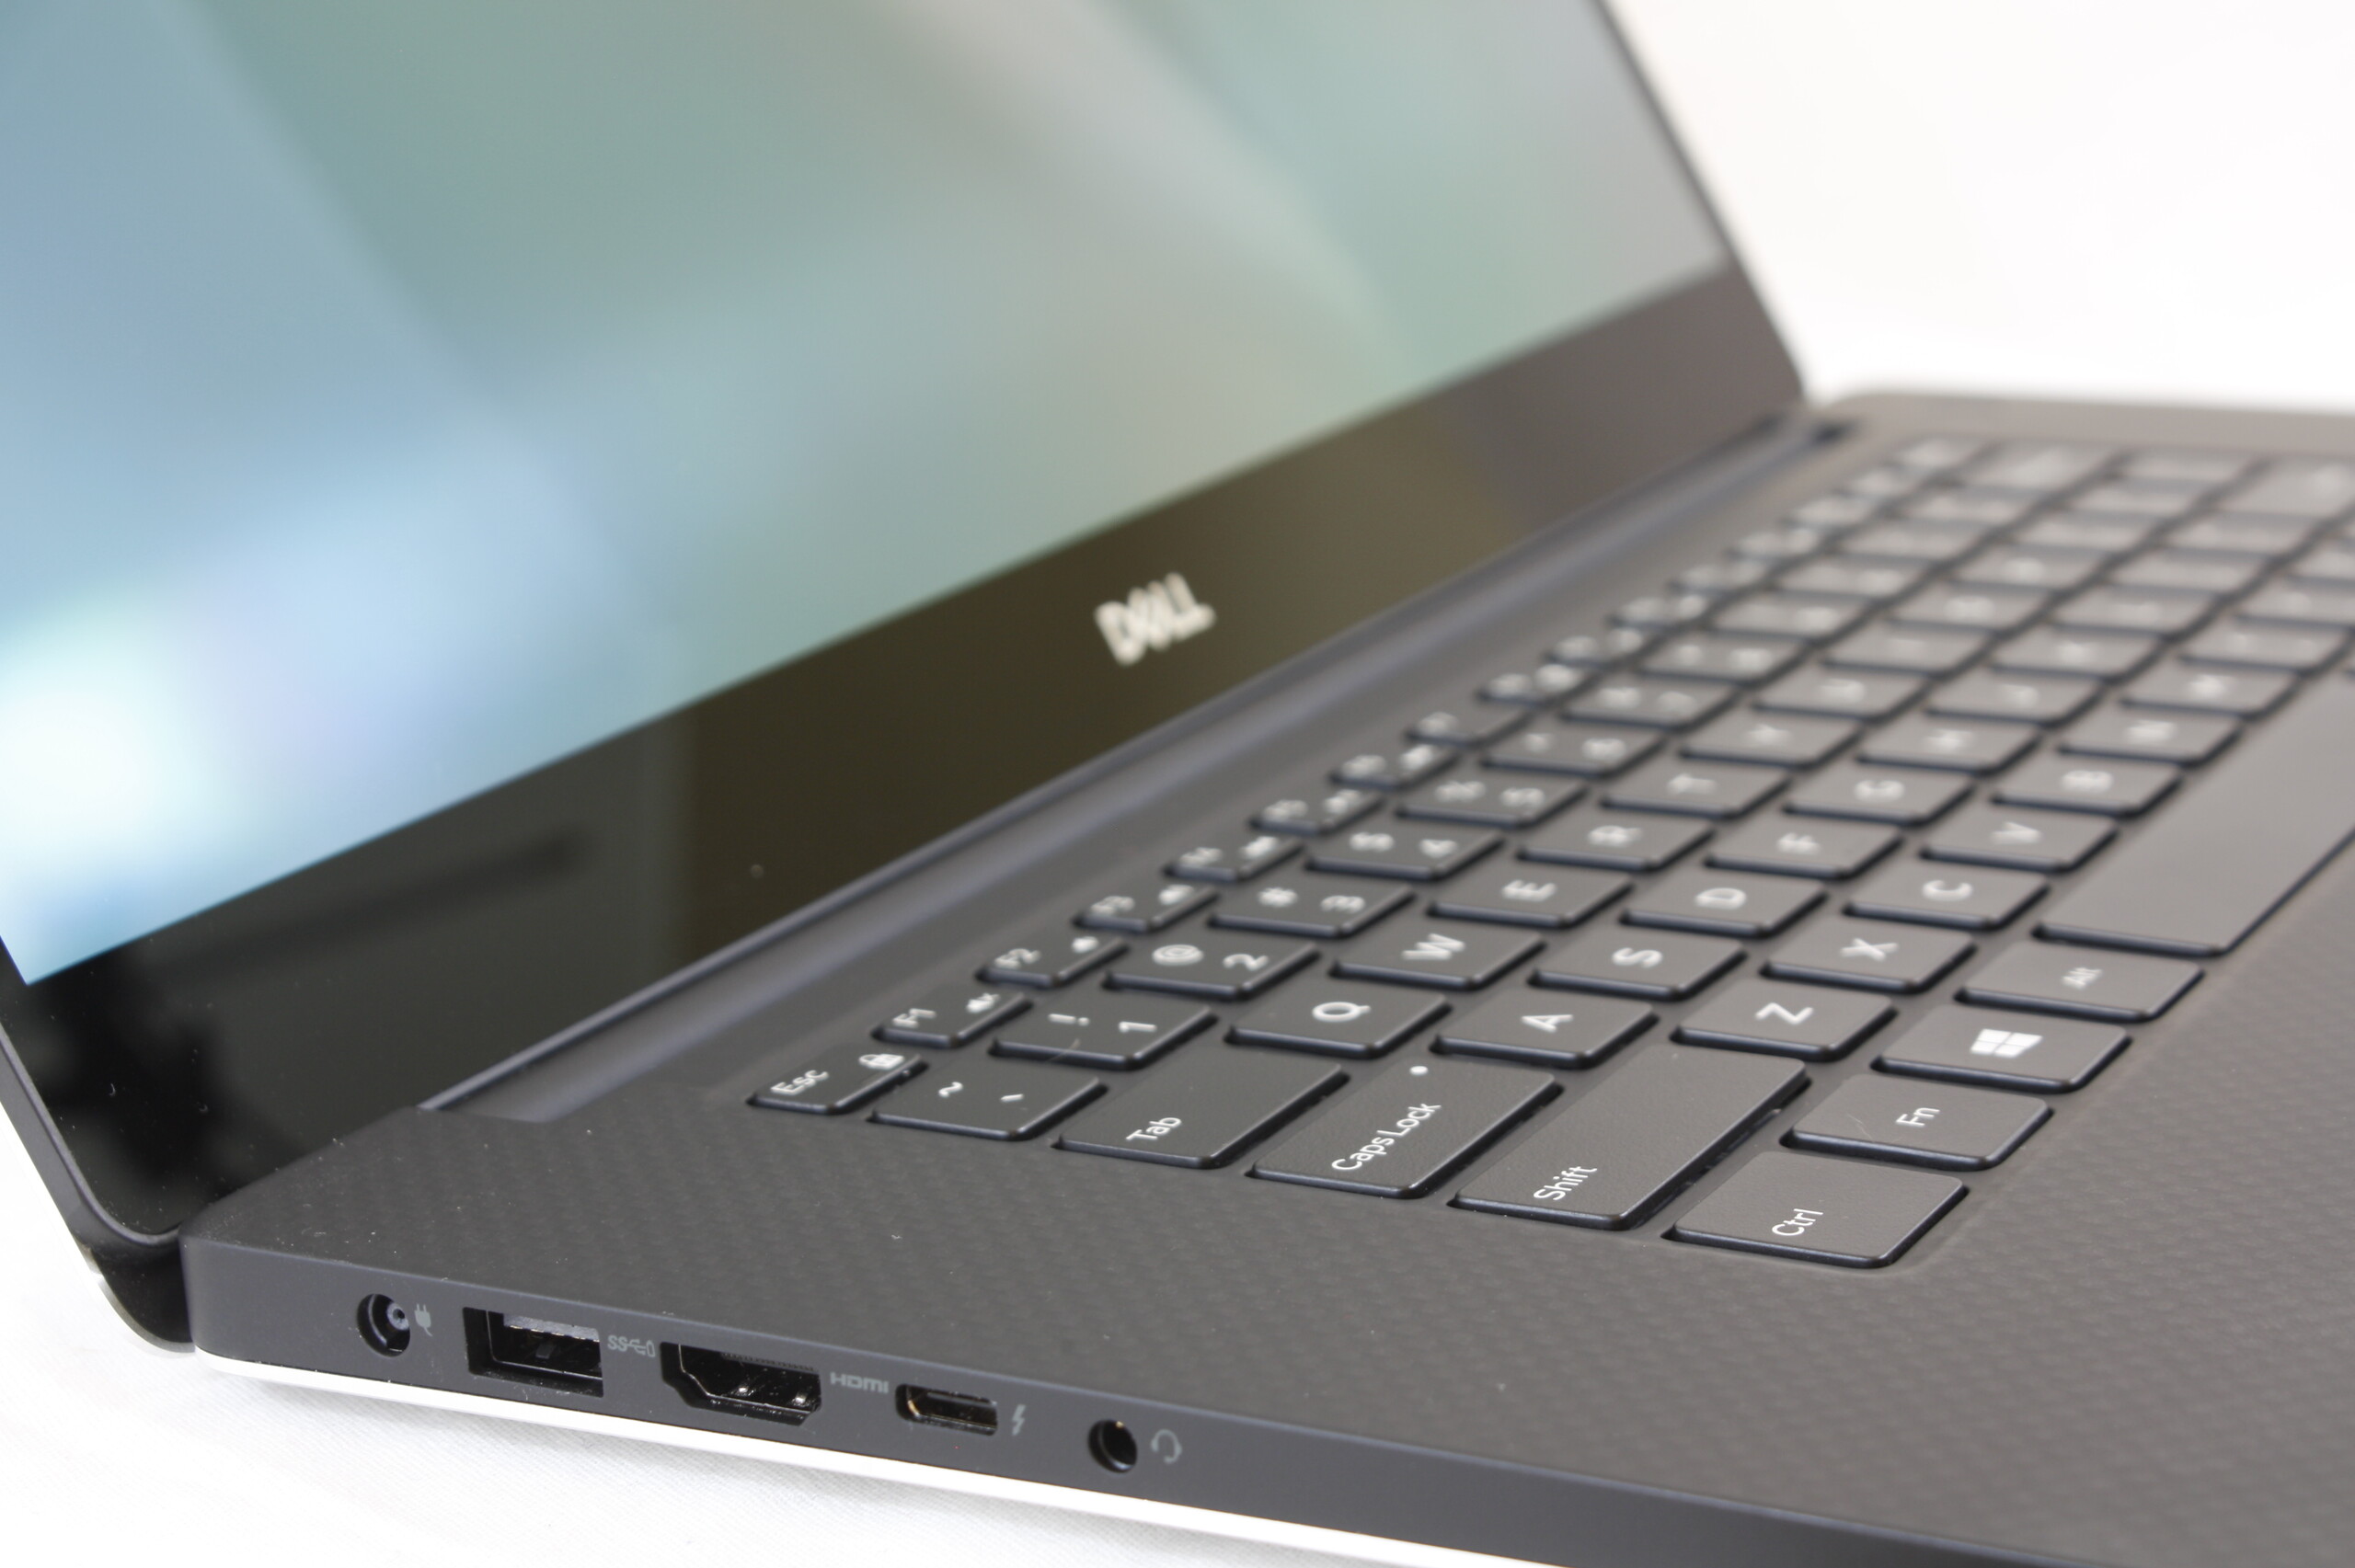 Dell Precision 5540 in Review: Workstation Doubles as a Hand